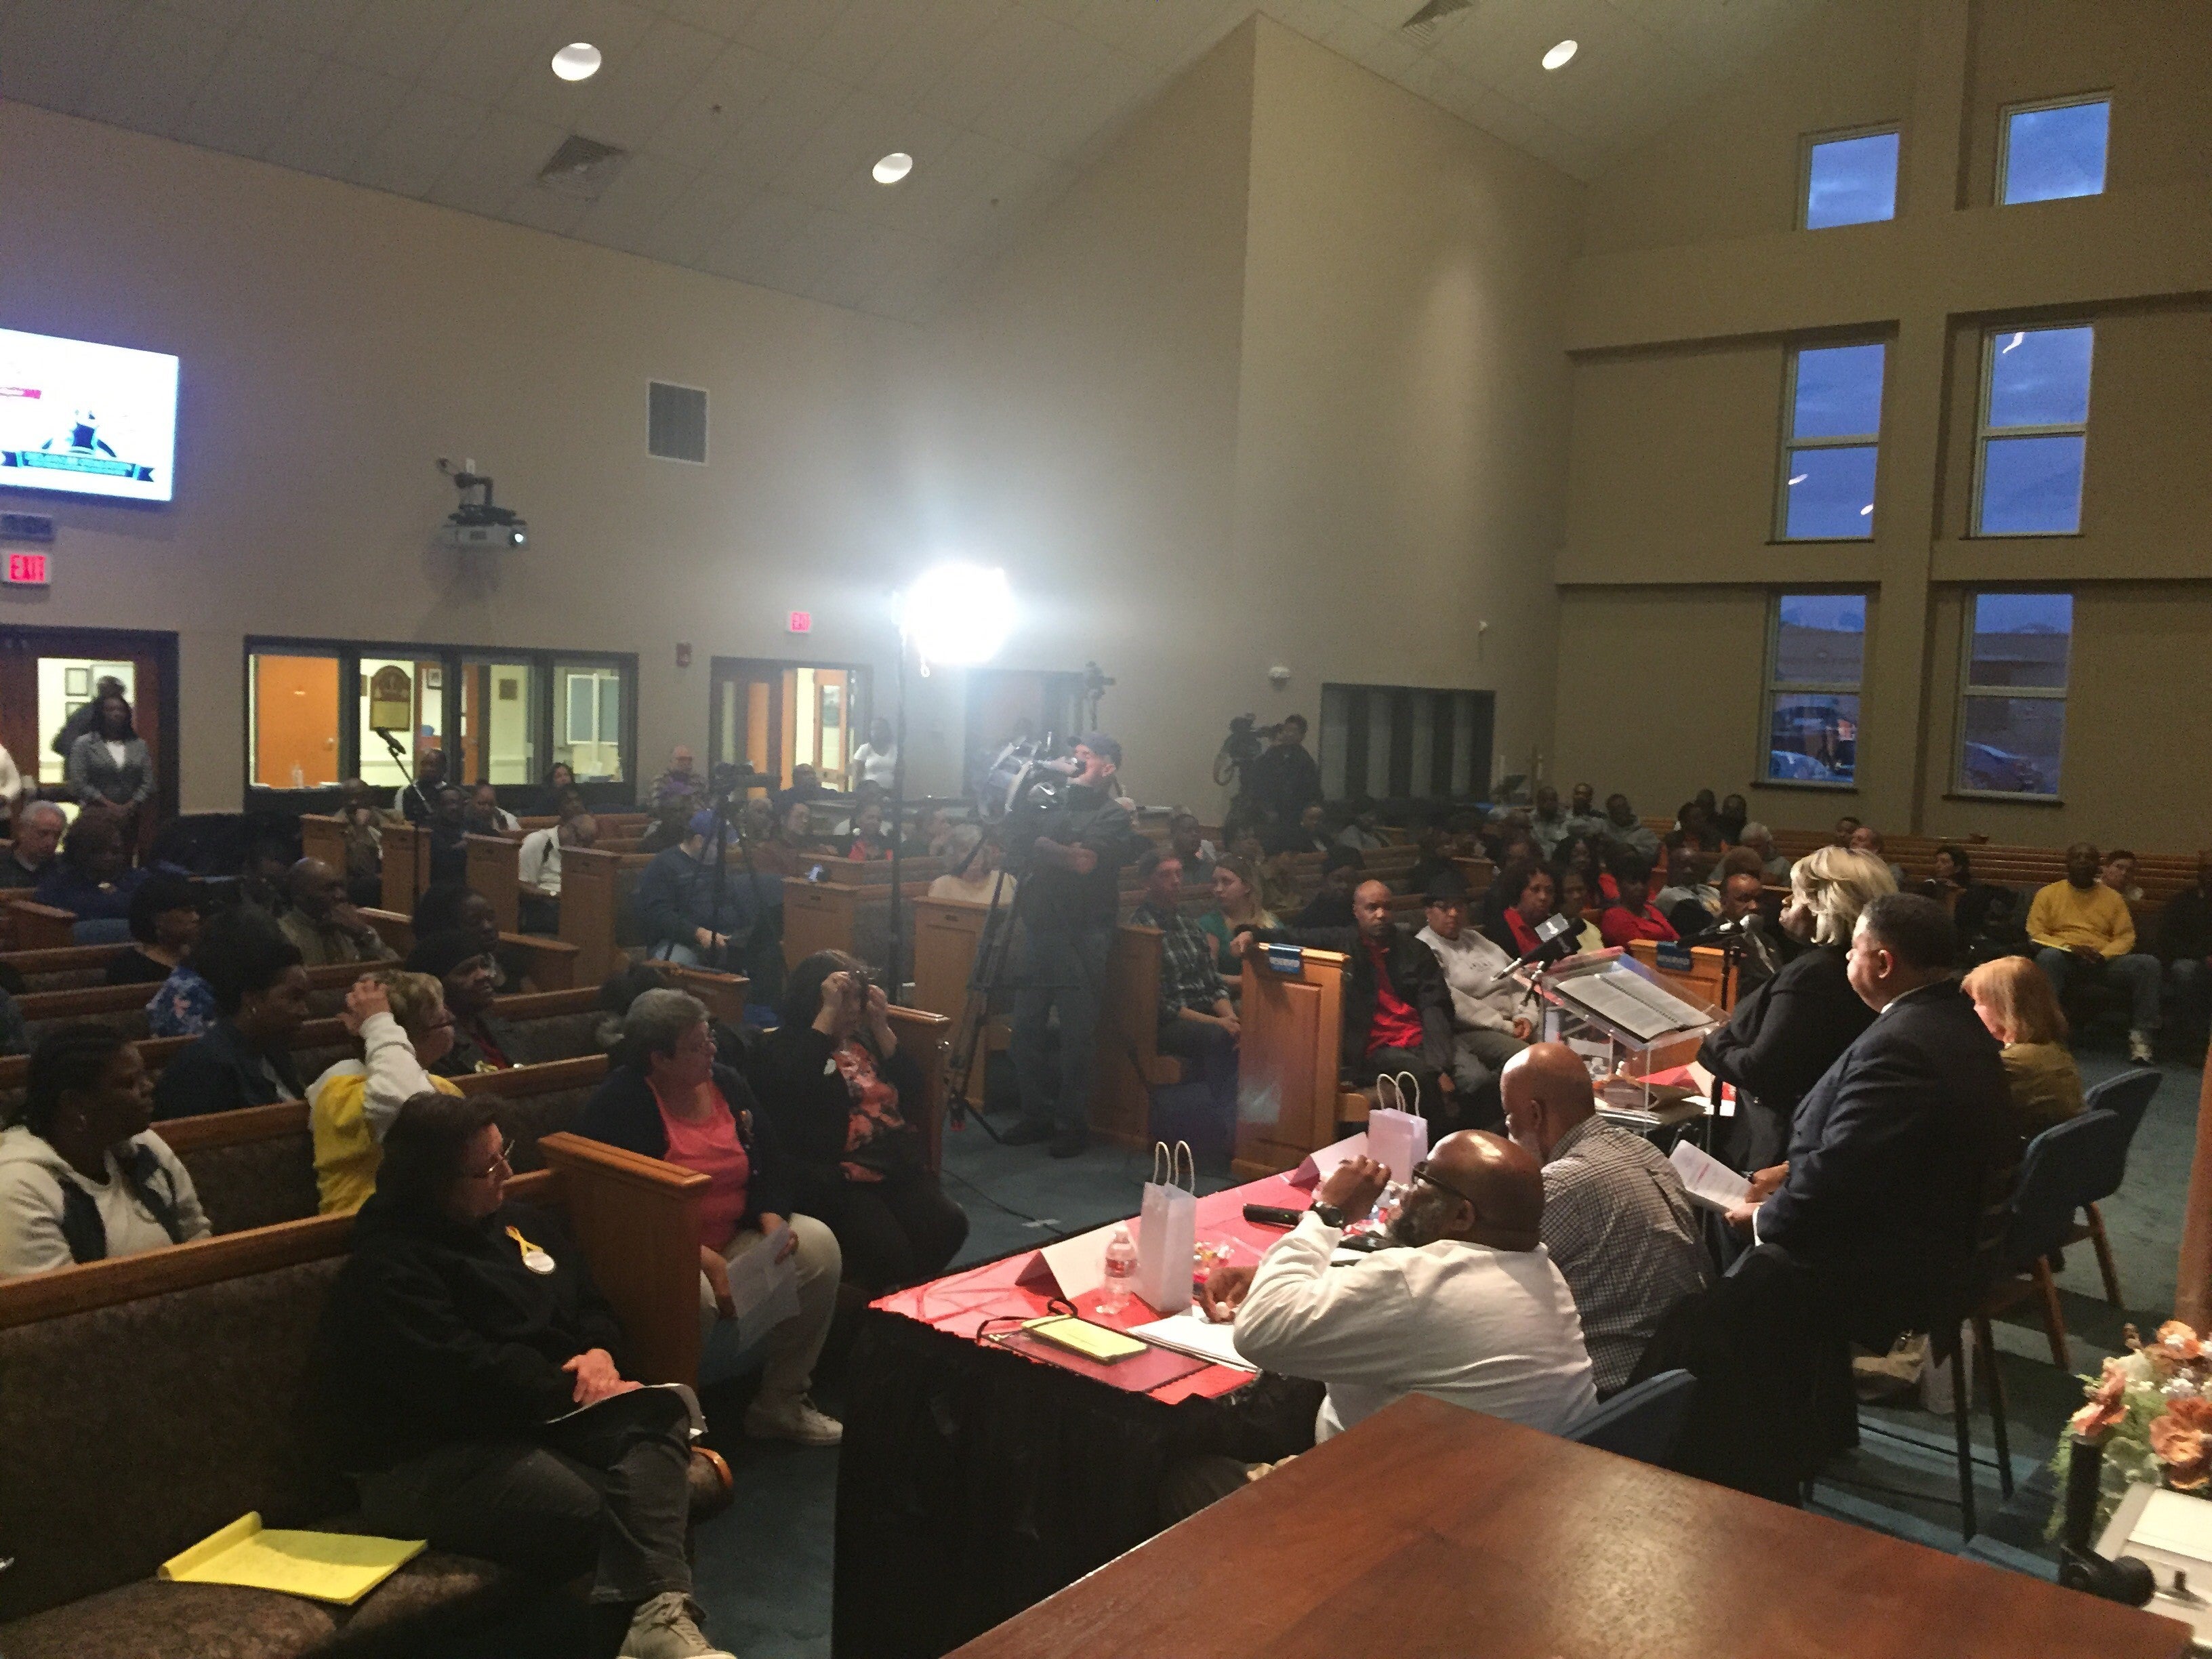  Nearly 200 people attended a town hall on Delaware prison reform Monday night. Many said prisoners are routinely subjected to abuse by guards and inadequate health care. (Cris Barrish/WHYY) 